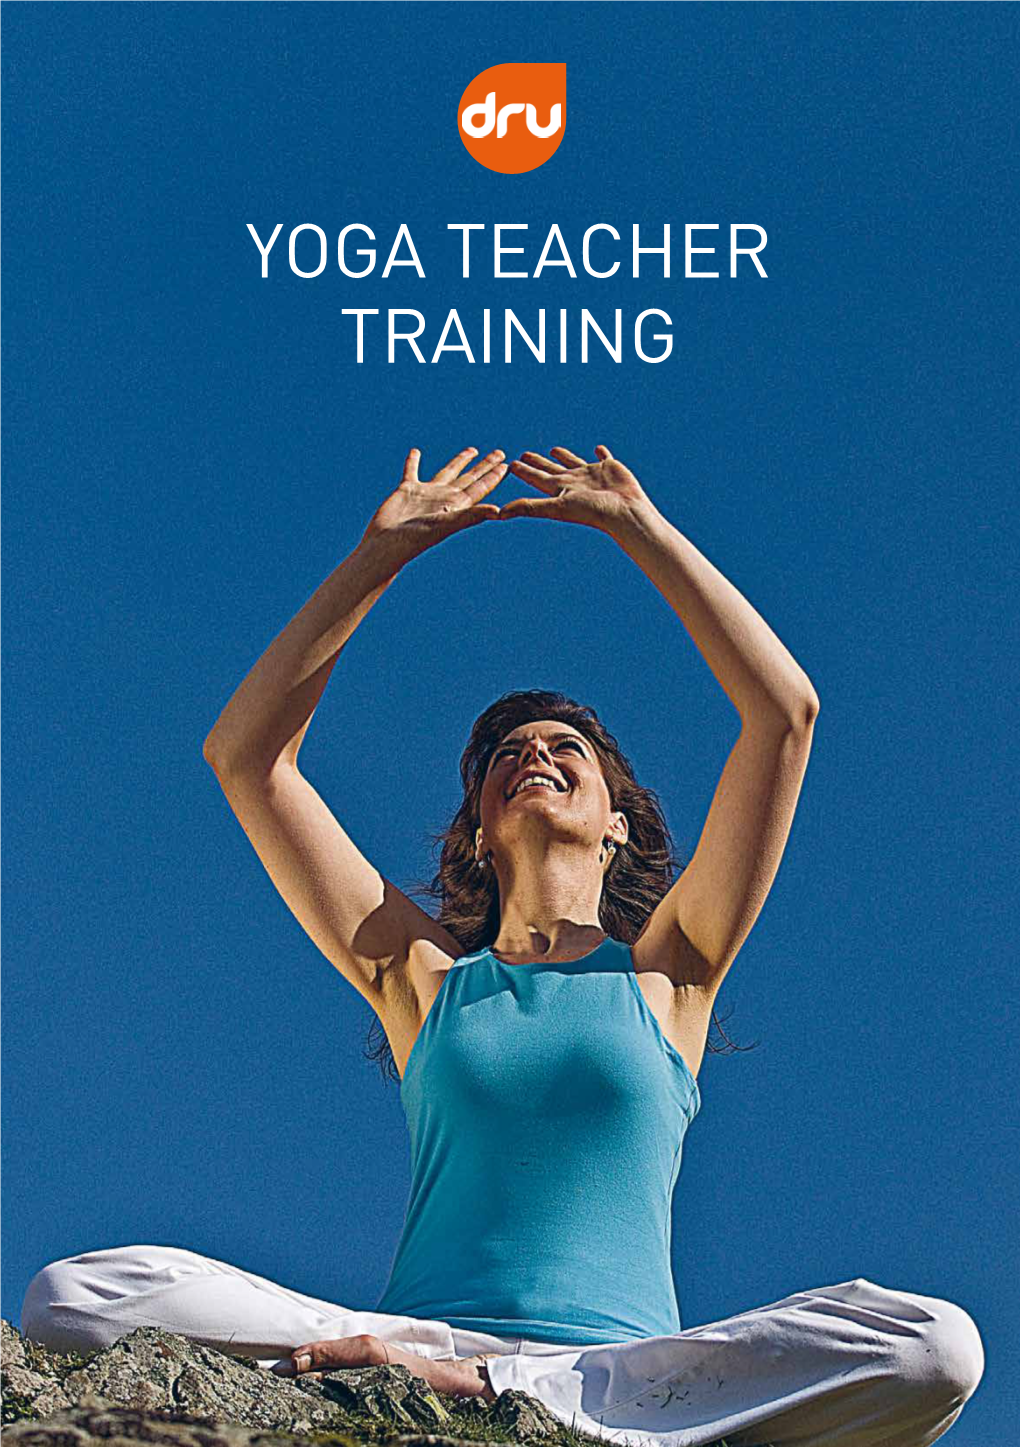 YOGA TEACHER TRAINING Since 1978 40 Years of Making a Difference CONTENTS 5